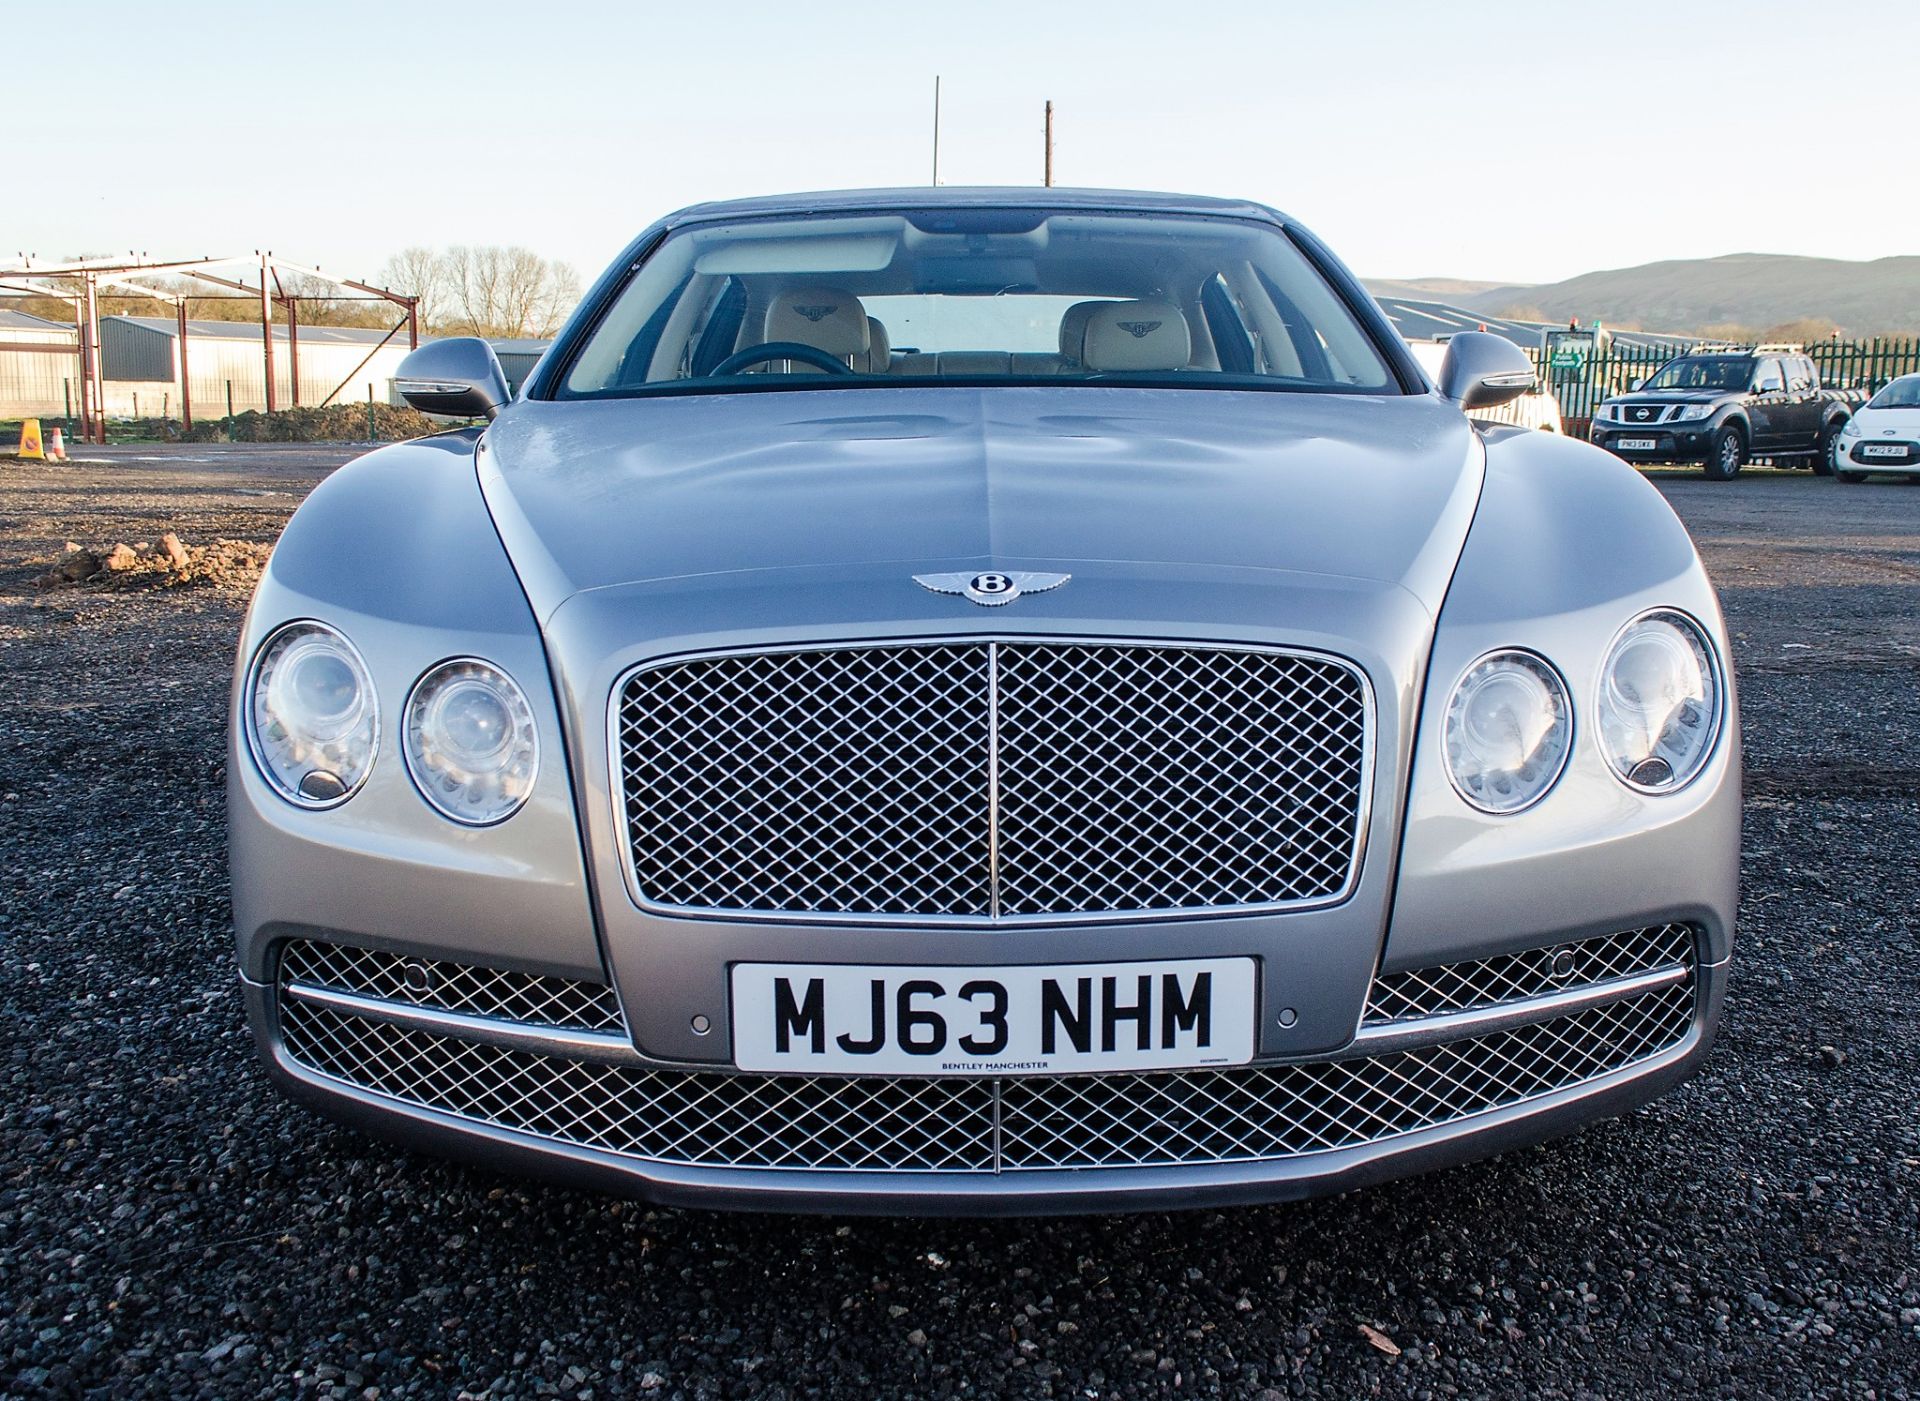 Bentley Flying Spur 6.0 W12 automatic 4 door saloon car Registration Number: MJ63 NHM Date of - Image 5 of 51